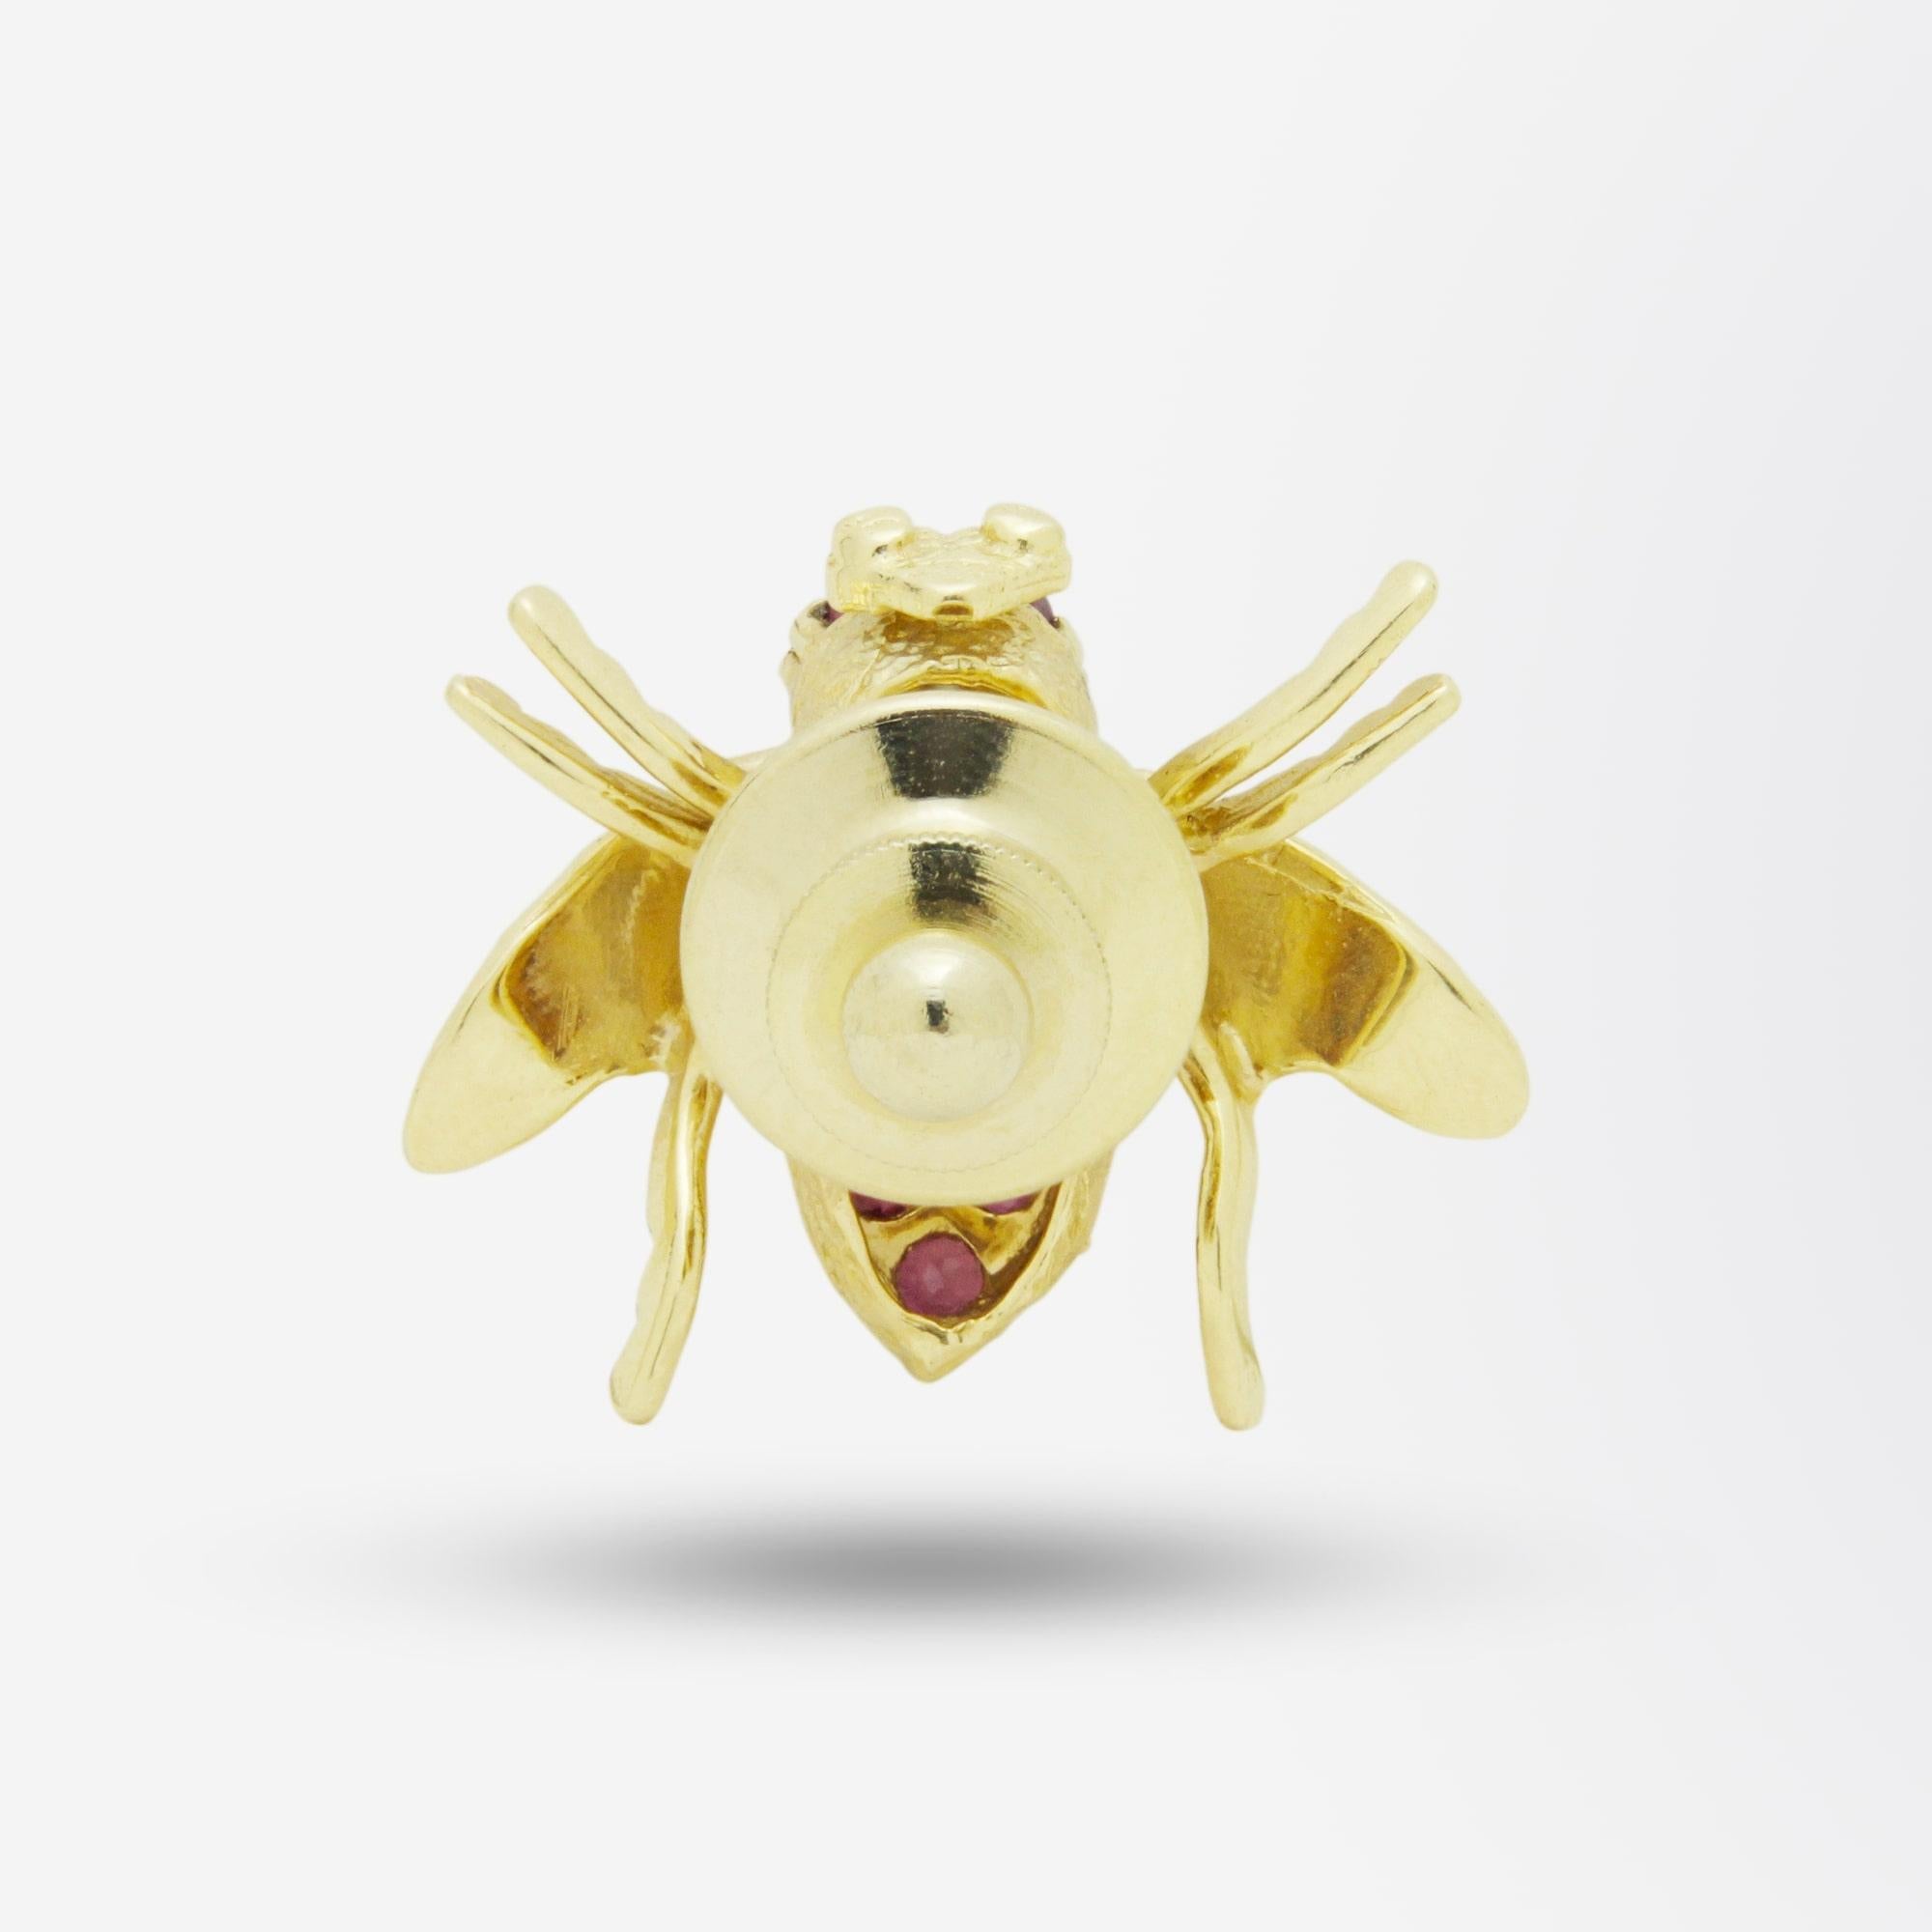 An 18 karat yellow gold pin in the form of a bee. The piece is set with 12 brilliant cut rubies and two natural cultured pearls which form the body of the bee. The rear has a gold plated sprung clip to secure the pin to a garment, which is in good